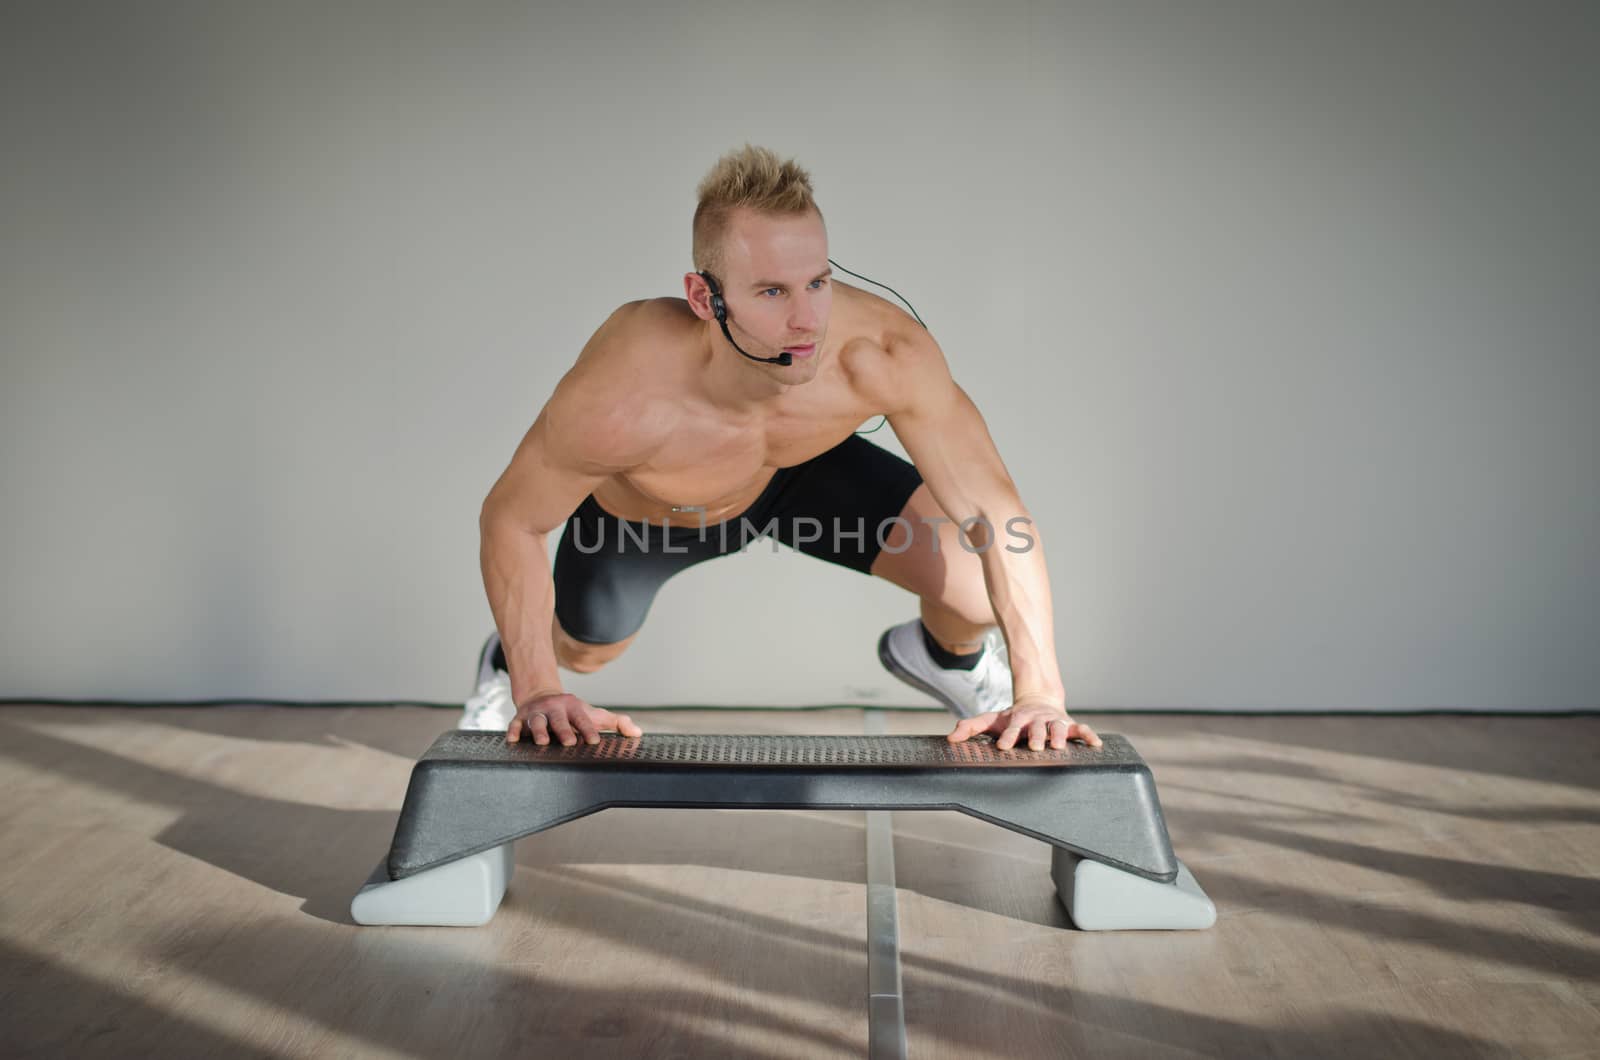 Young aerobics male coach shirtless leaning on step teaching class